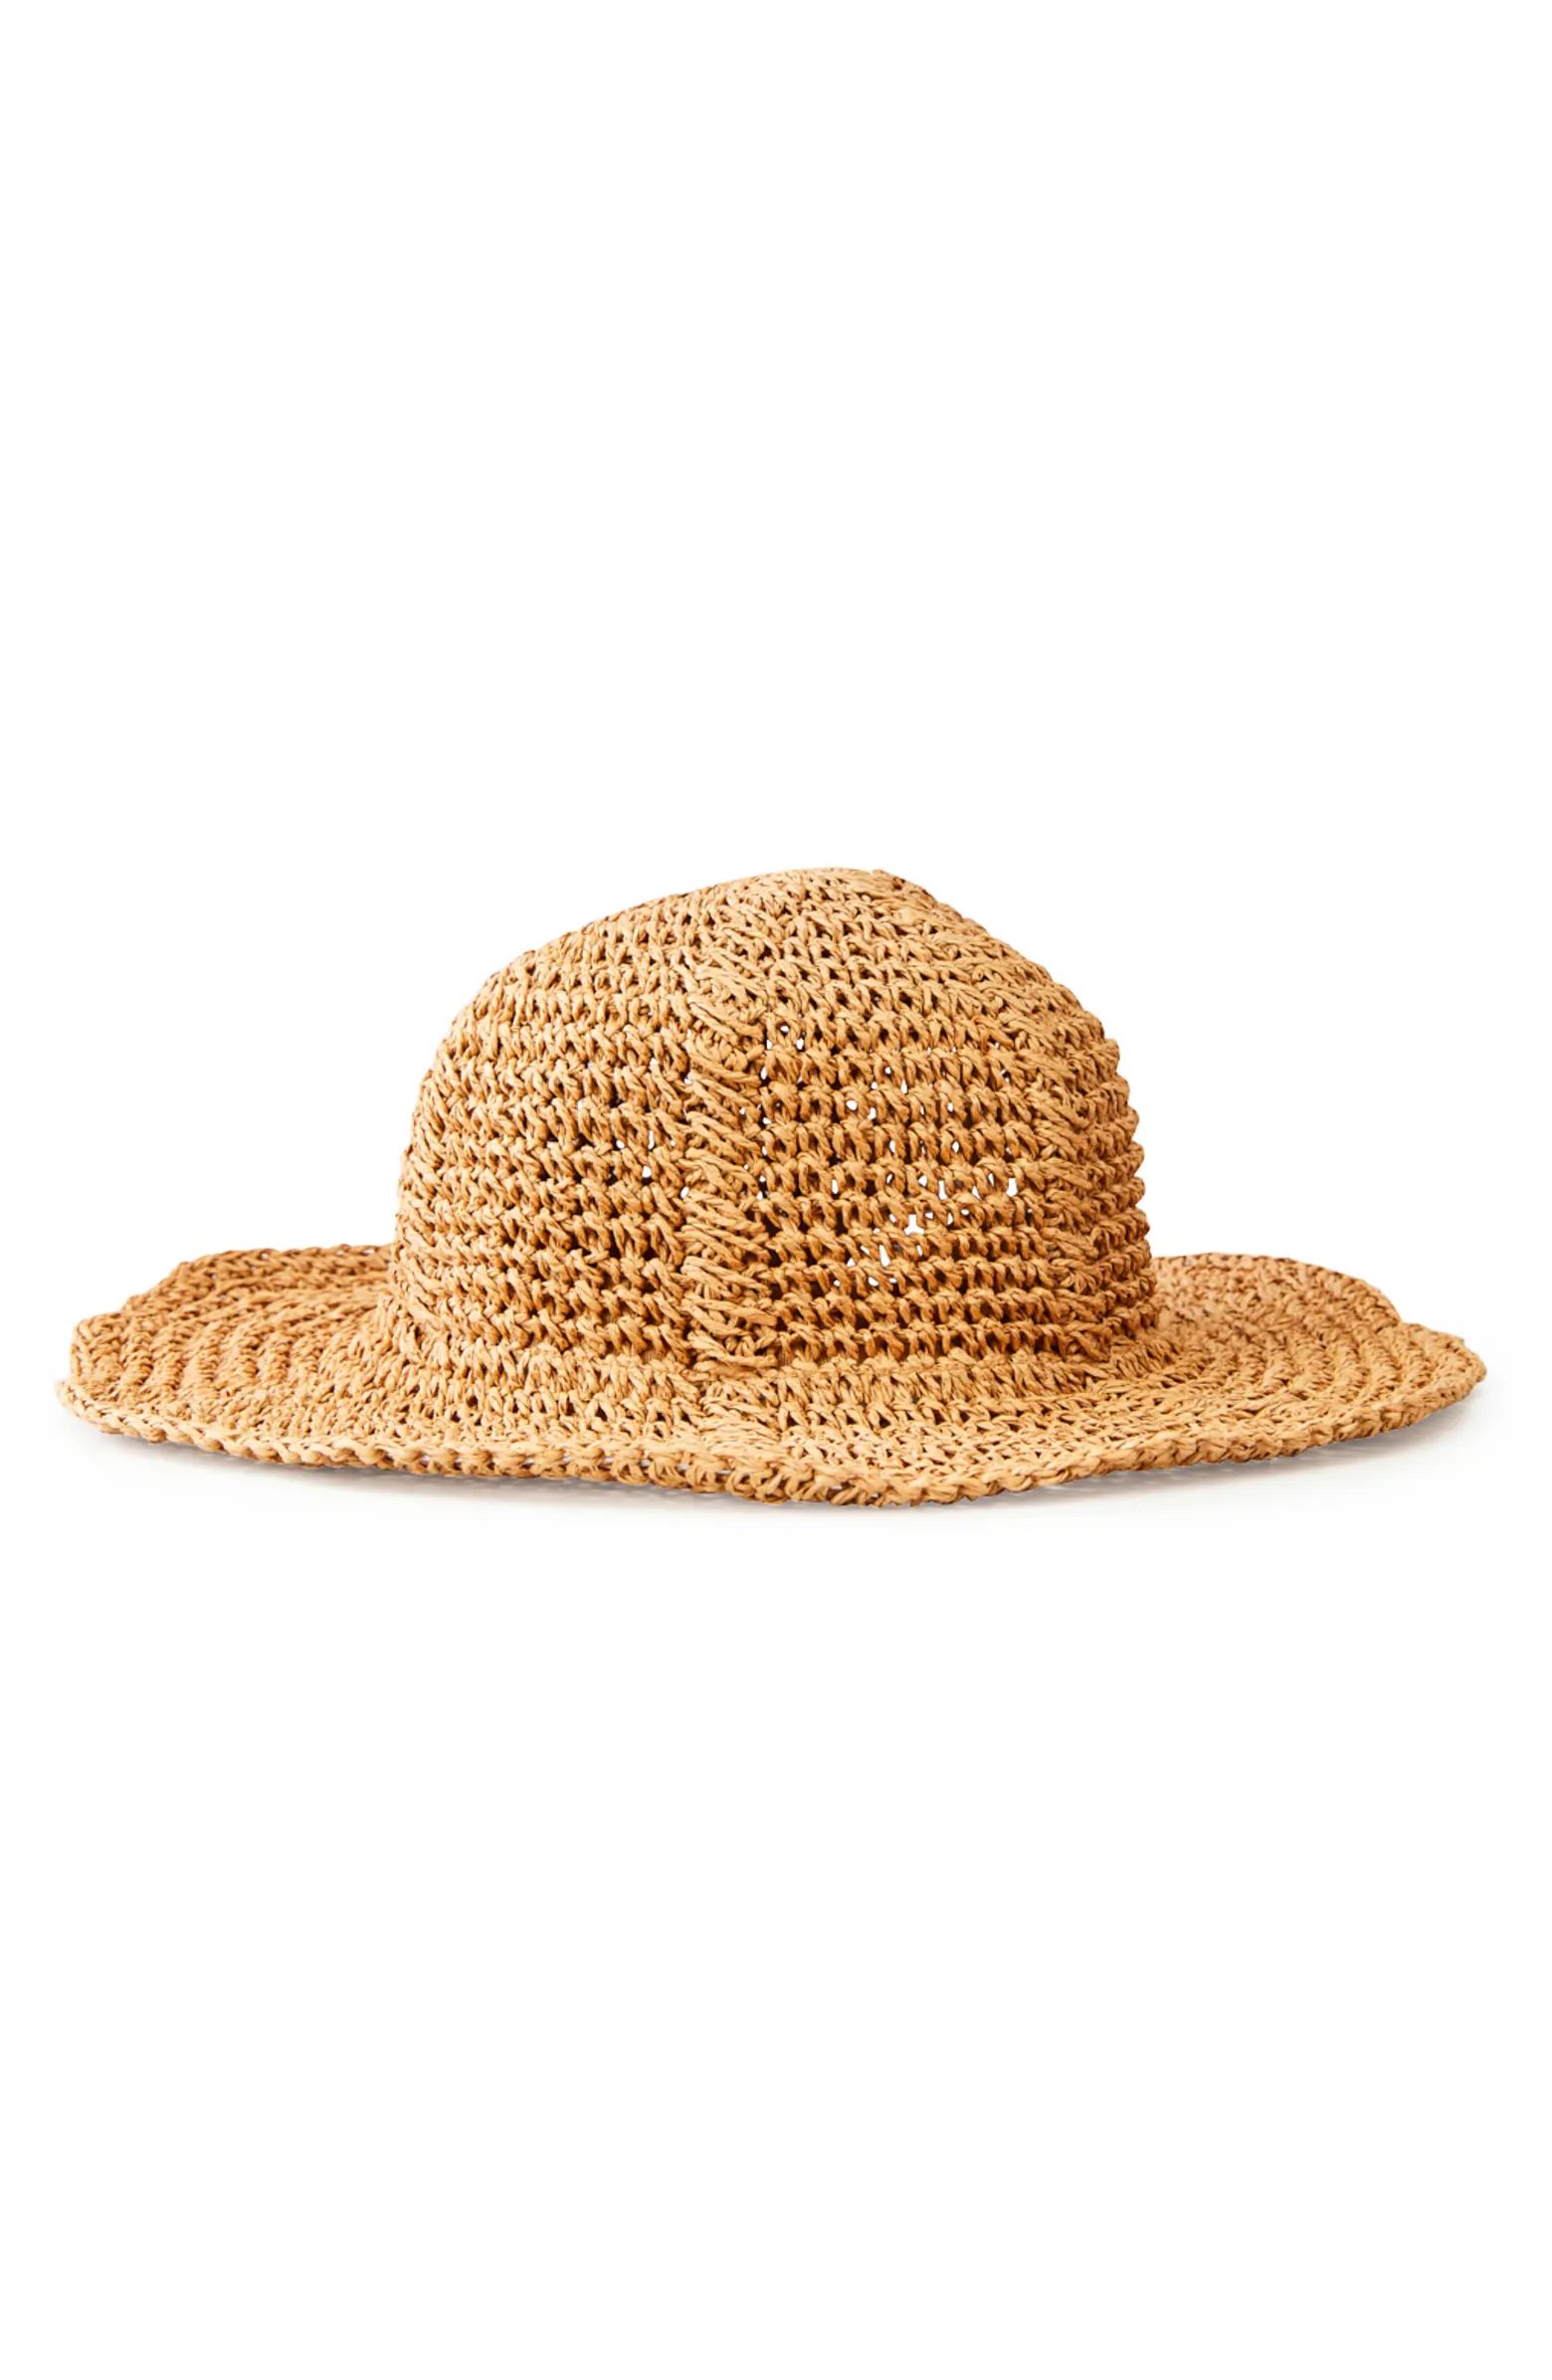 Rip Curl Tallows Straw Hat | Nordstrom | Nordstrom